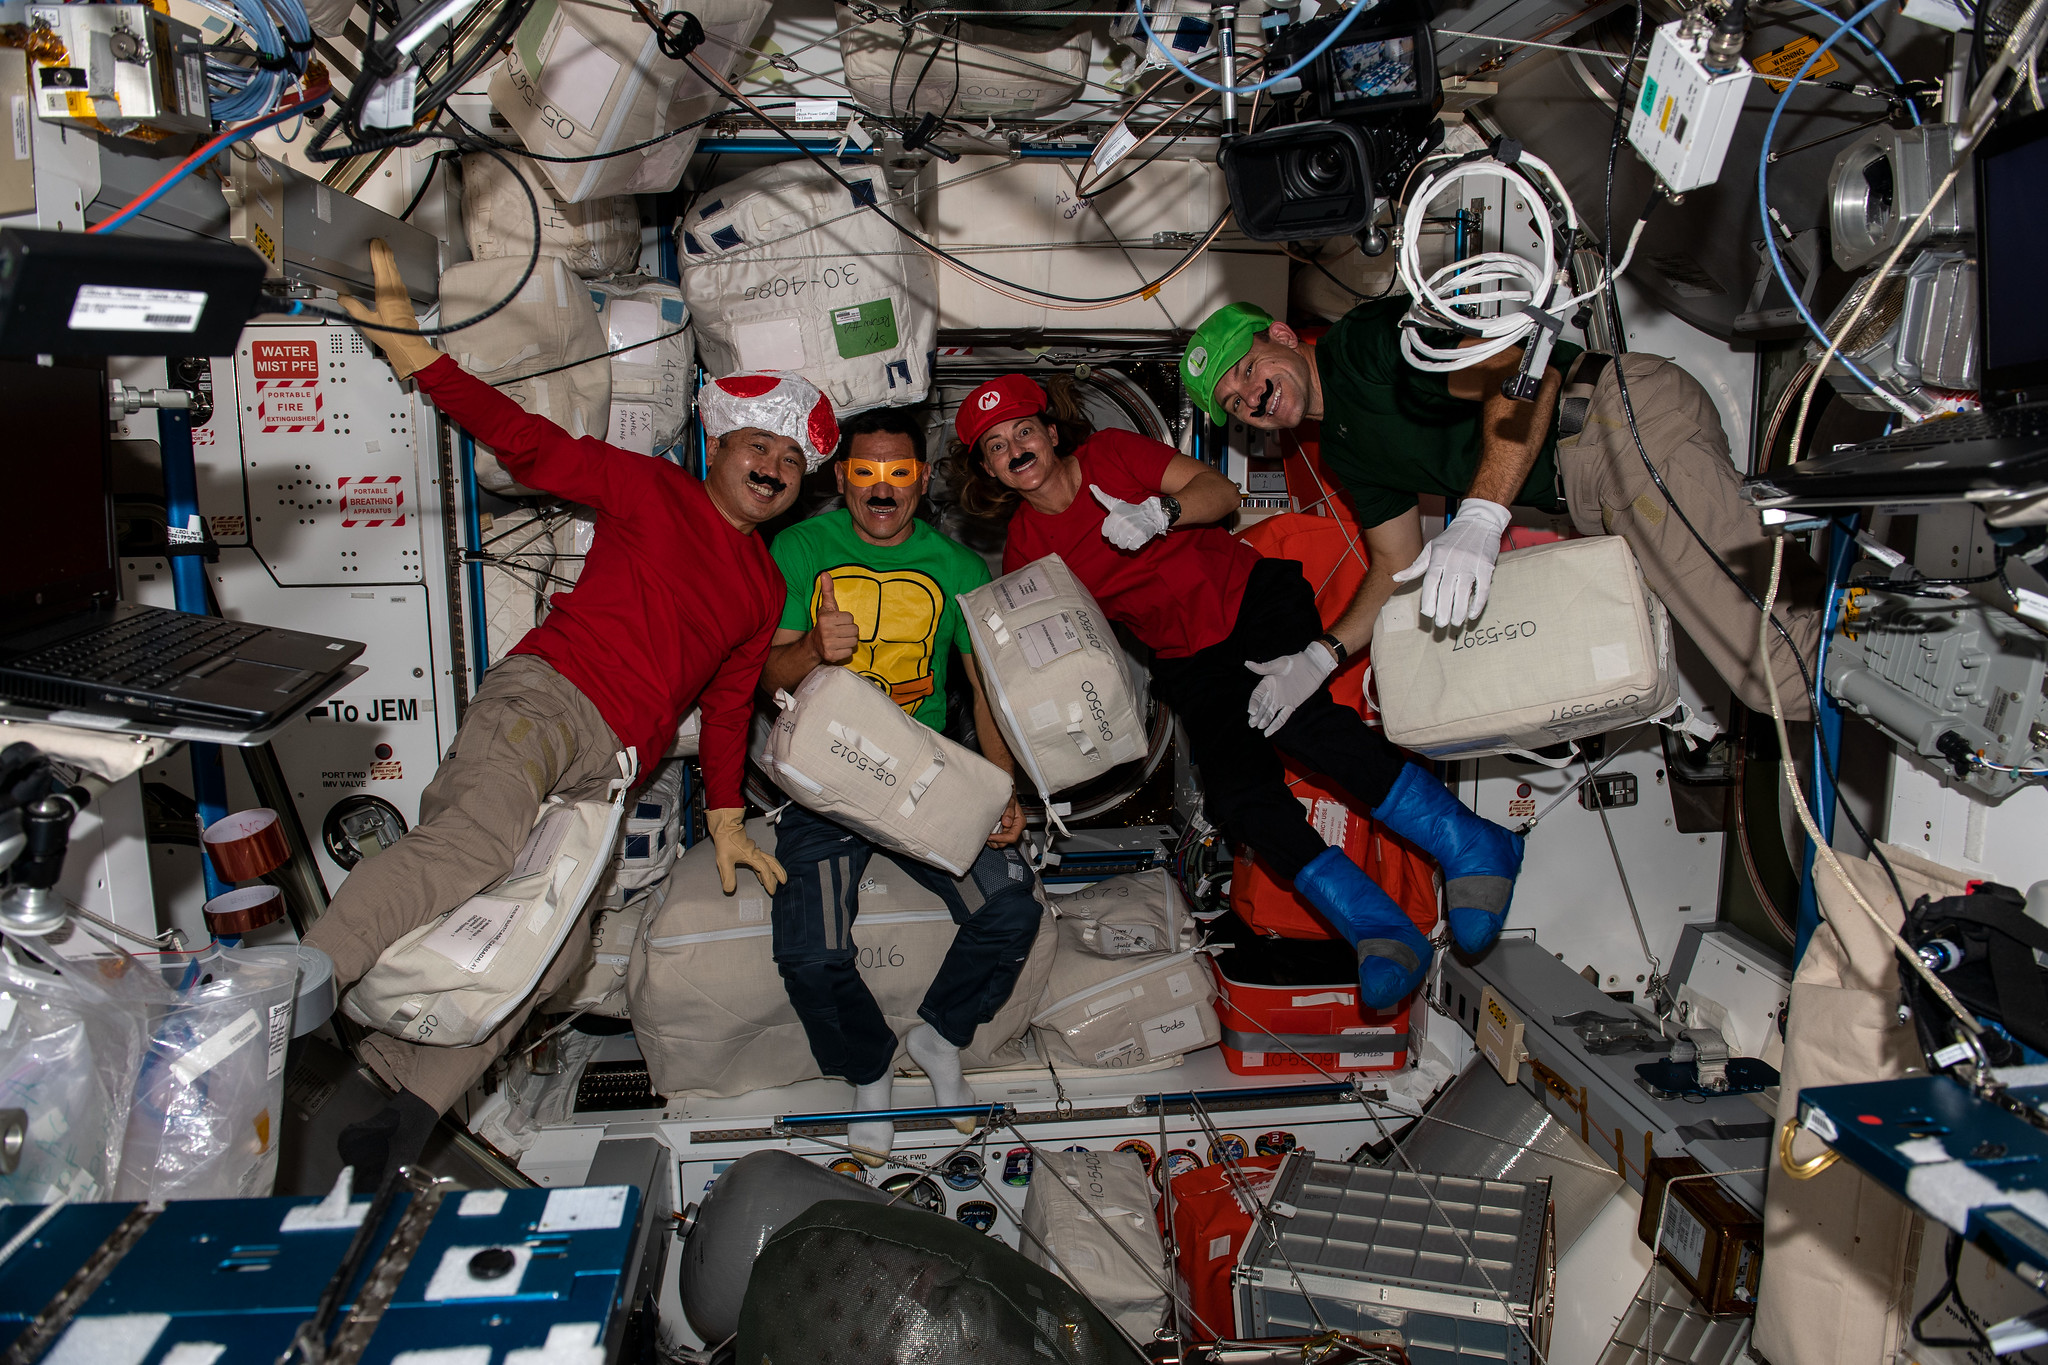 image of astronauts celebrating Halloween dressed up as video game and cartoon characters aboard the International Space Station.